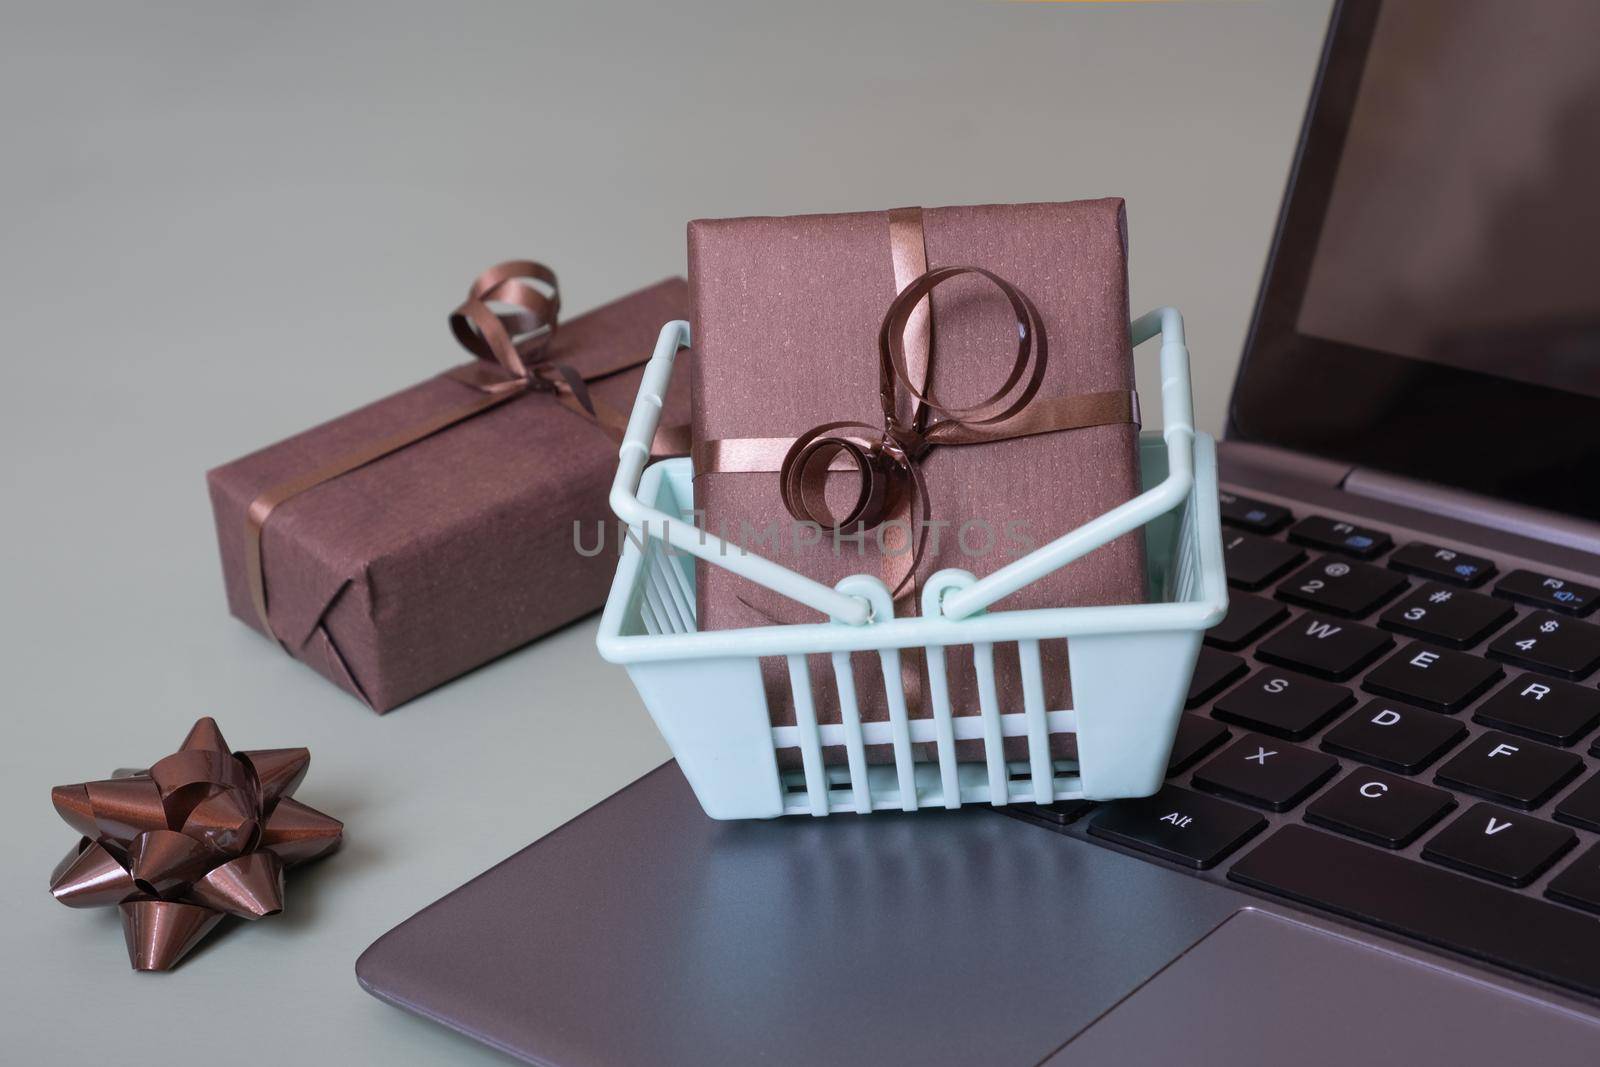 Wrapped gifts in shopping baskets on laptop. Online shopping concept.